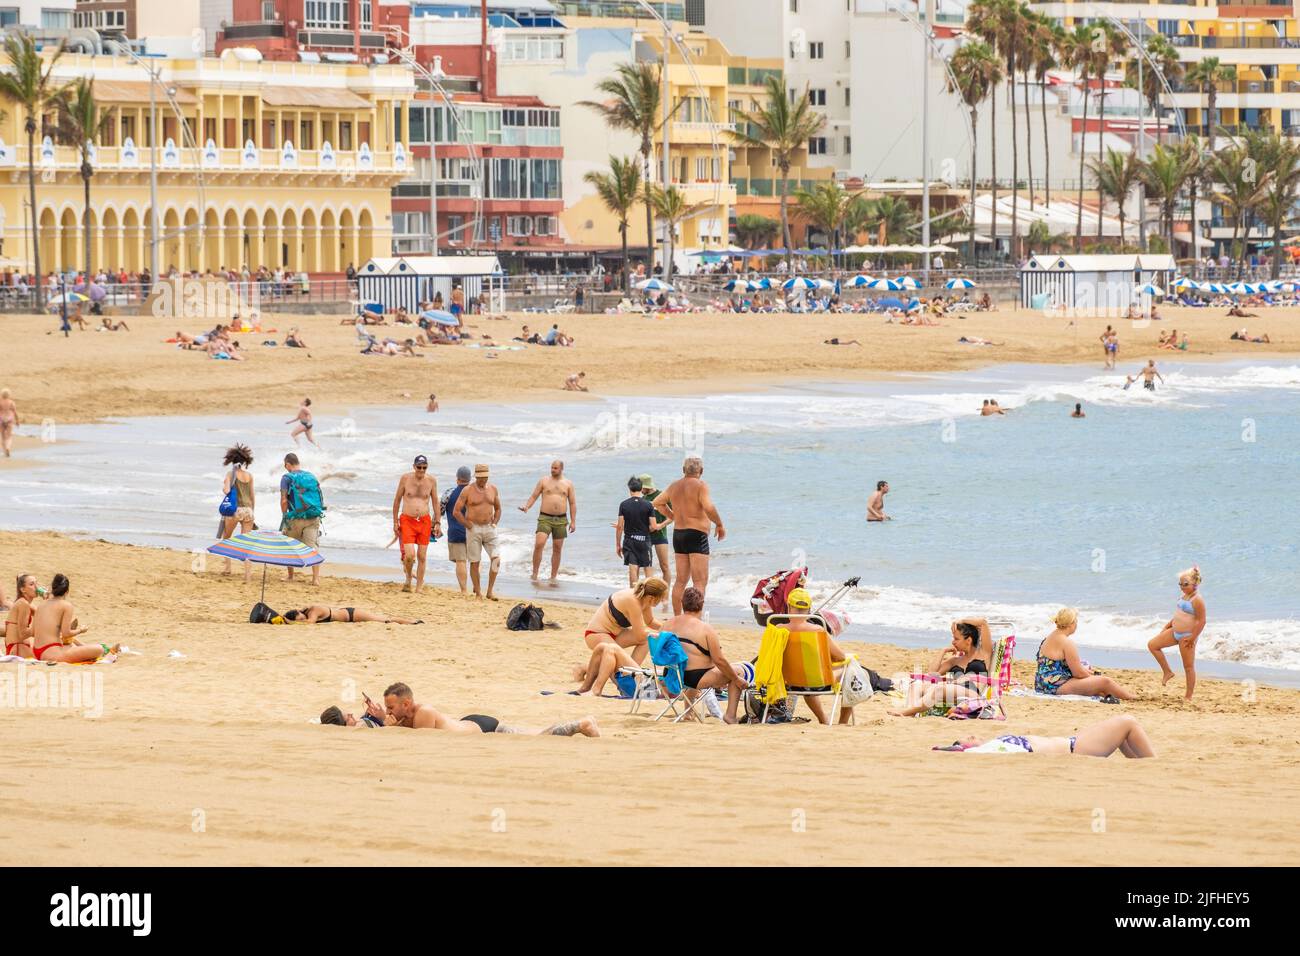 Las Palmas, Gran Canaria, Canary Islands, Spain. 3rd July, 2022. Tourists, many from the UK, on the city beach in Las Palmas on Gran Canaria; a popular holiday destination for many UK holidaymakers. Flight cancellations and staff shortages at some UK airports are expected to cause disruption throughout the summer. Credit: Alan Dawson/ Alamy Live News. Stock Photo